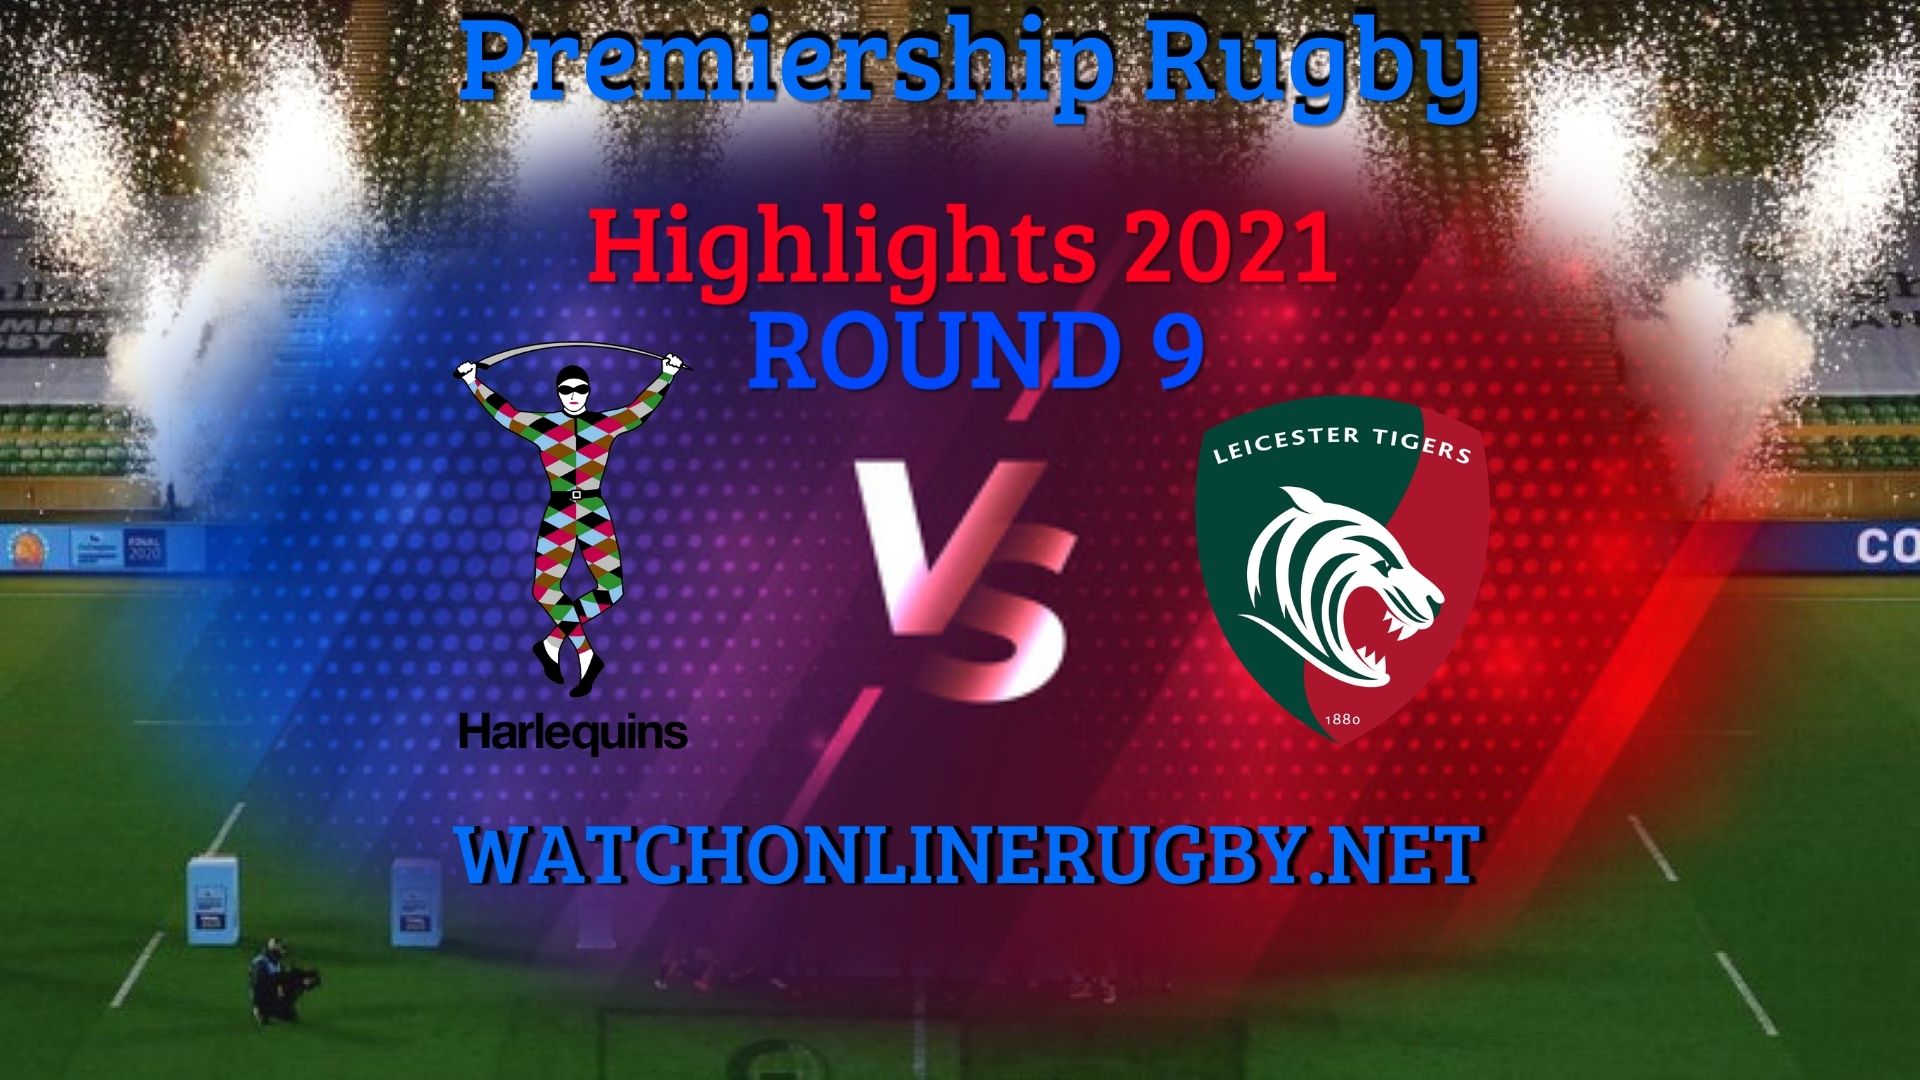 Harlequins Vs Leicester Tigers Premiership Rugby 2021 RD 9